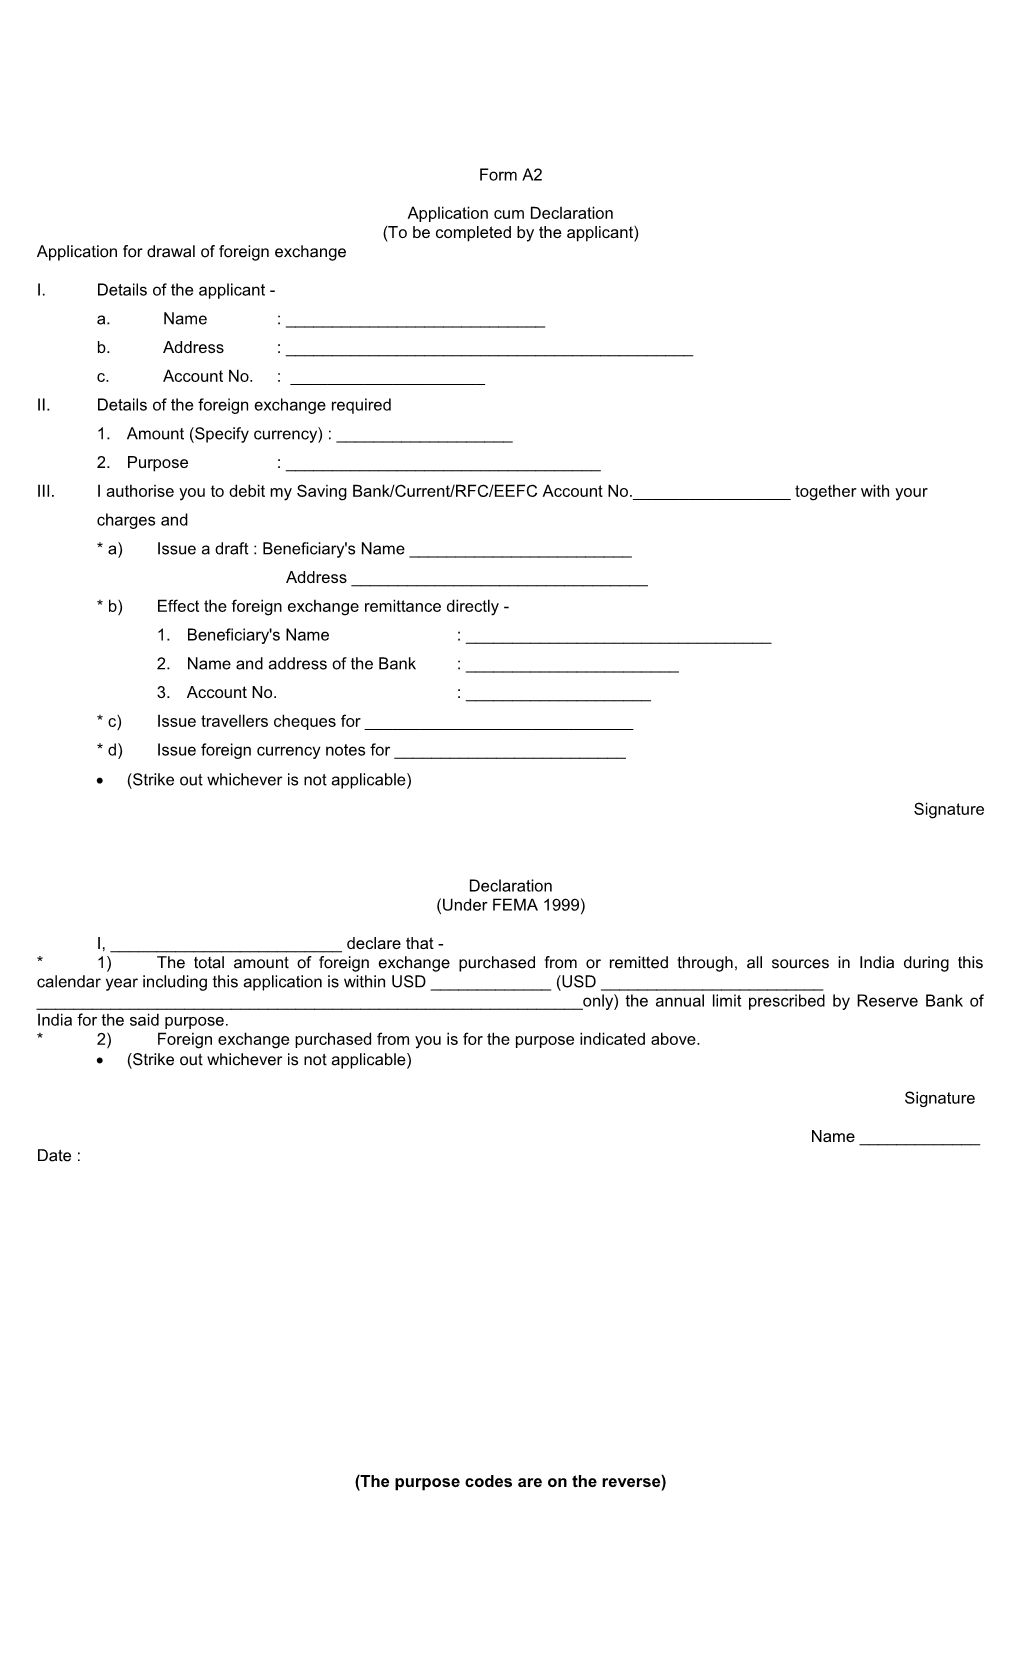 Application for Drawal of Foreign Exchange